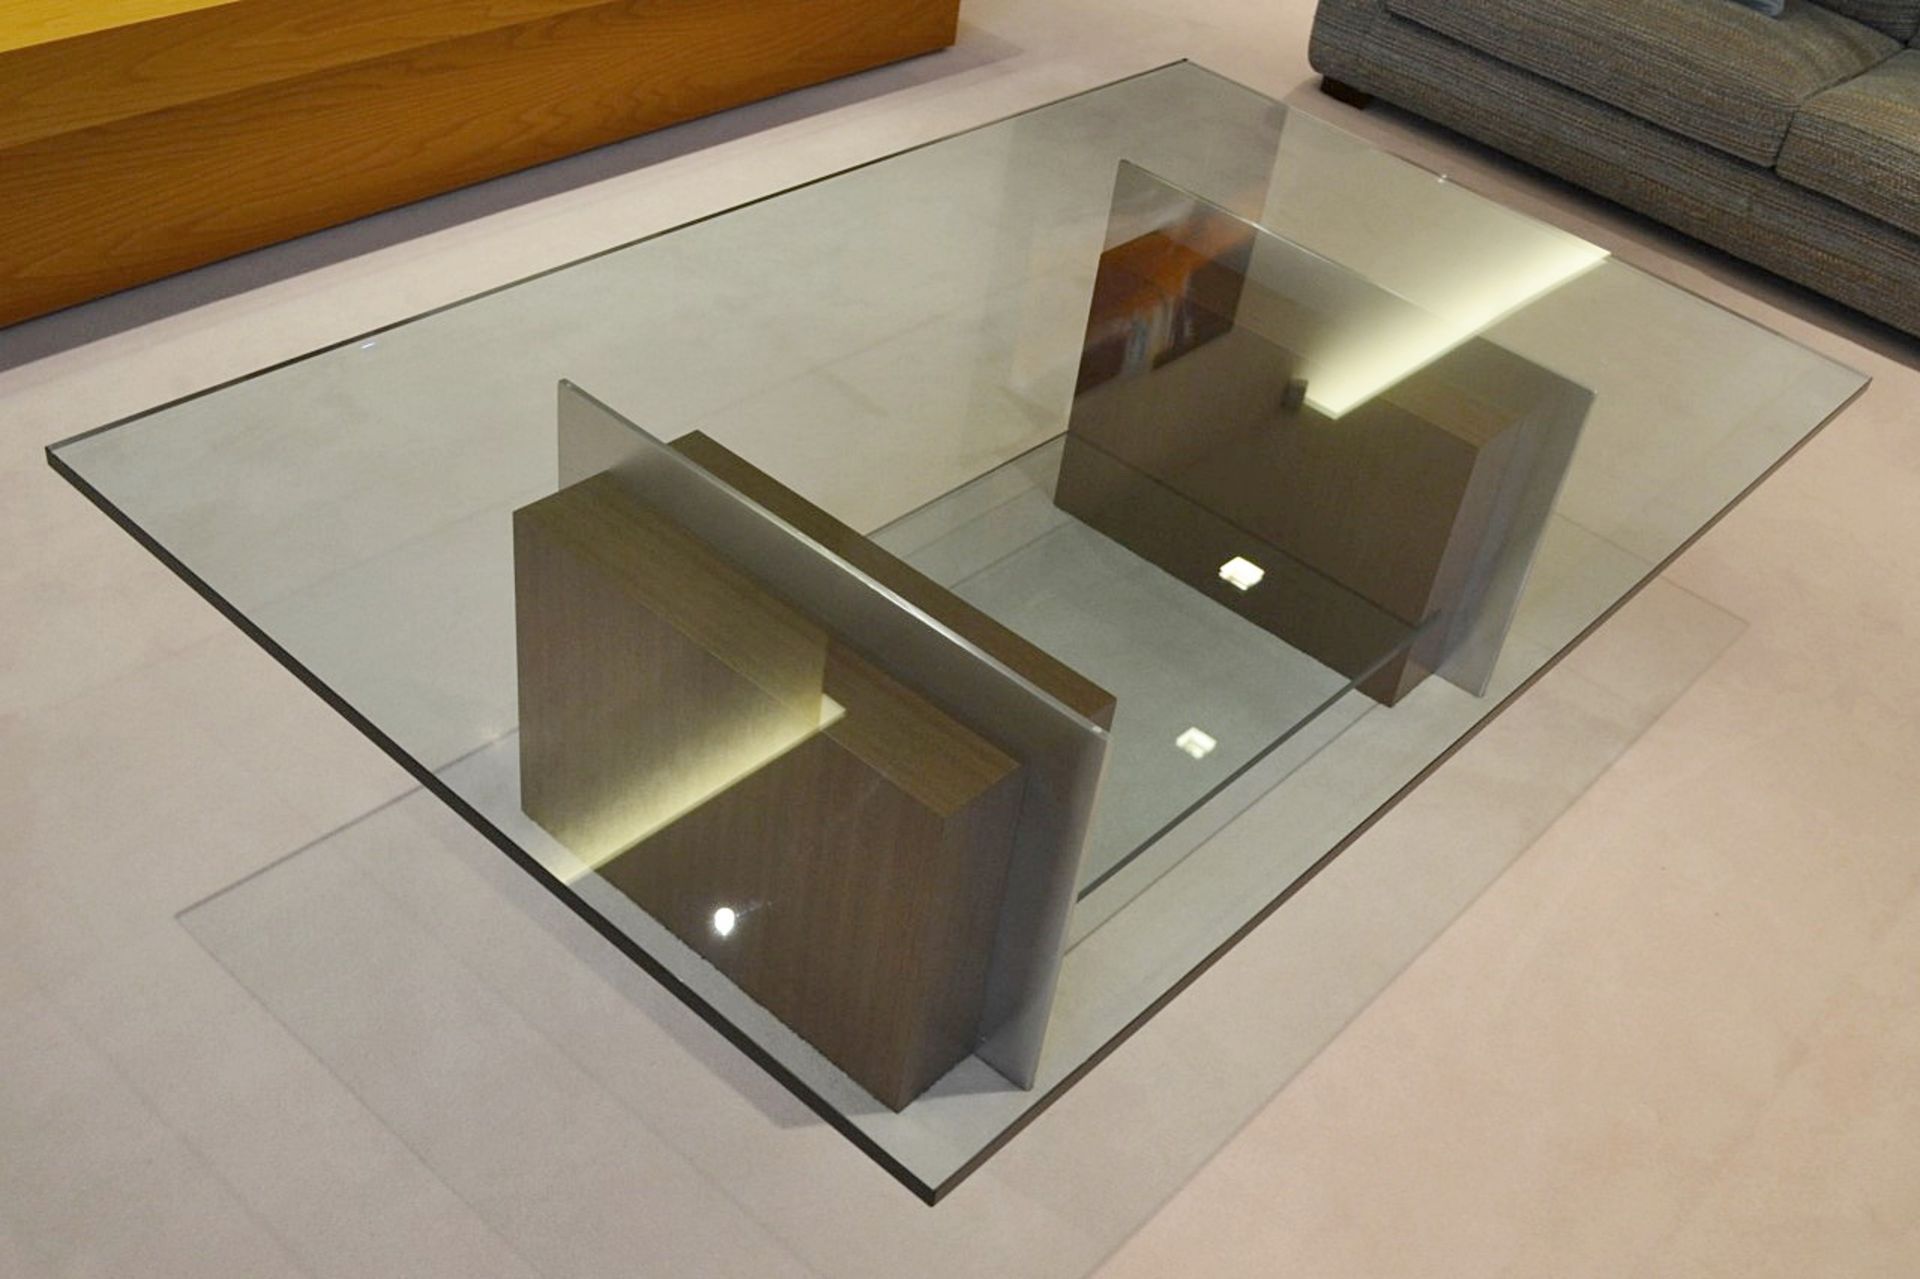 1 x Modern Large Glass Coffee Table With Glass Shelf And Stylish Square Bases - NO VAT ON HAMMER